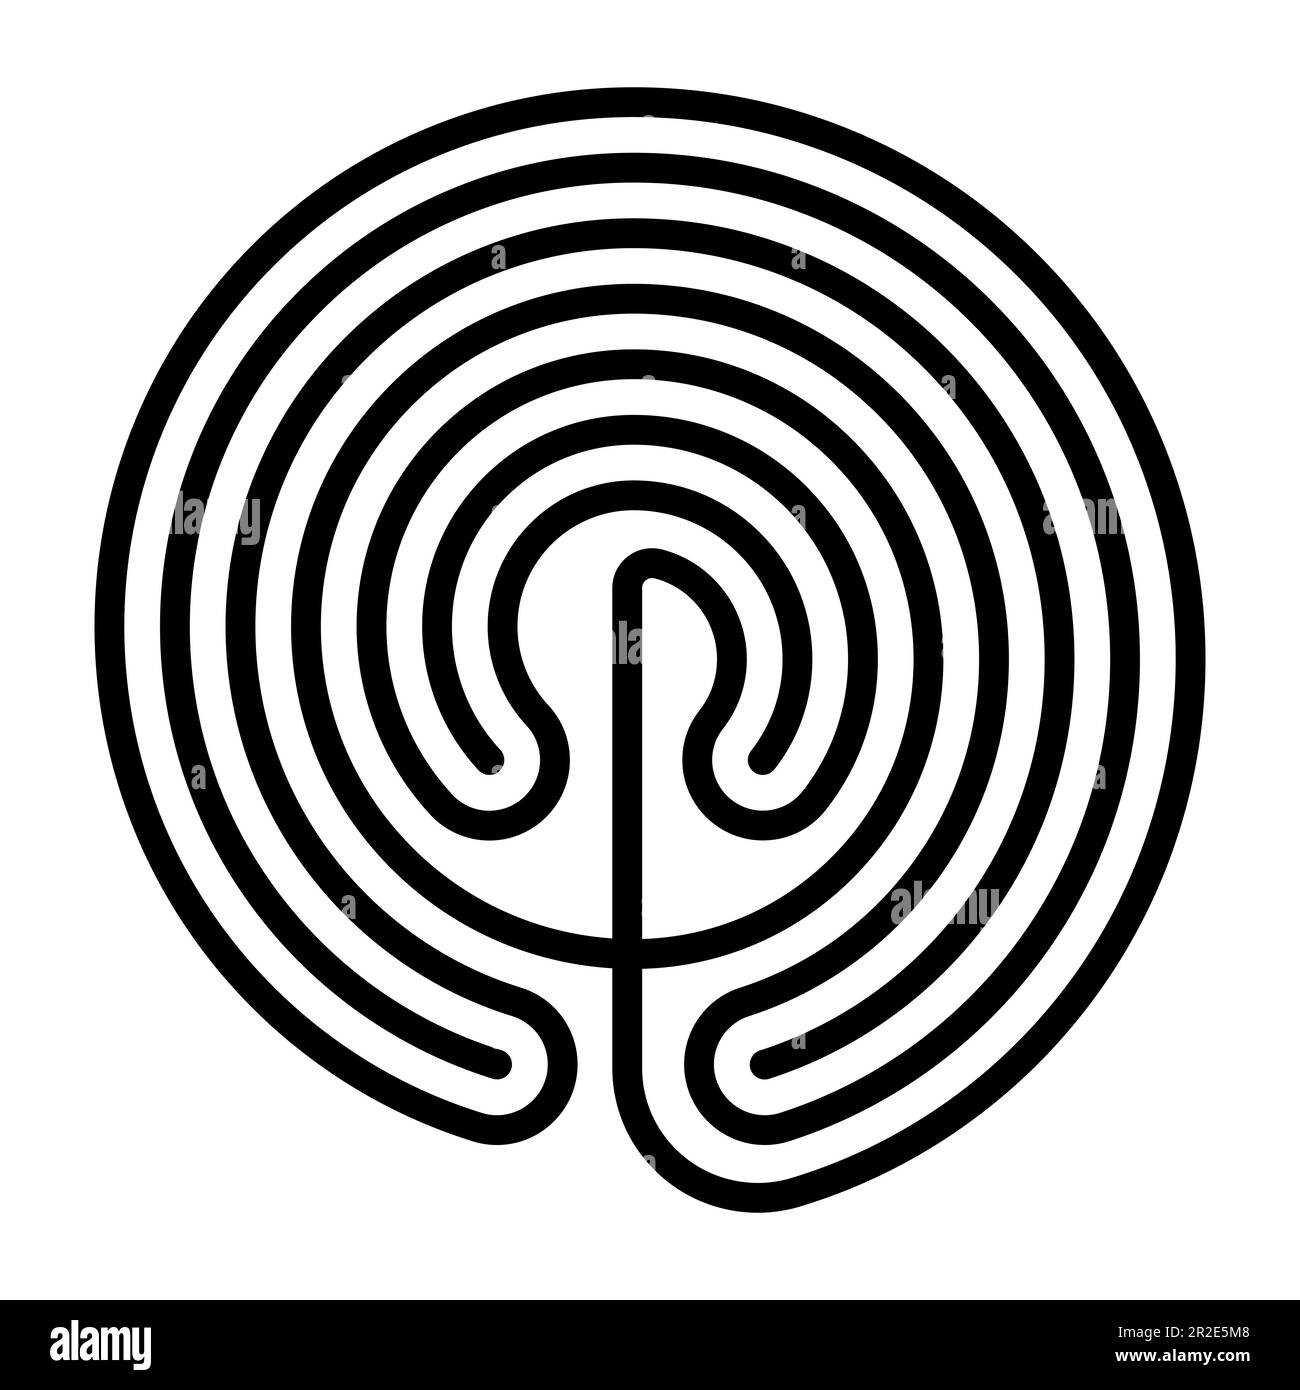 Circle shaped Cretan labyrinth. Classical design of a single path in seven courses, as depicted on silver coins from Knossos. Stock Photo